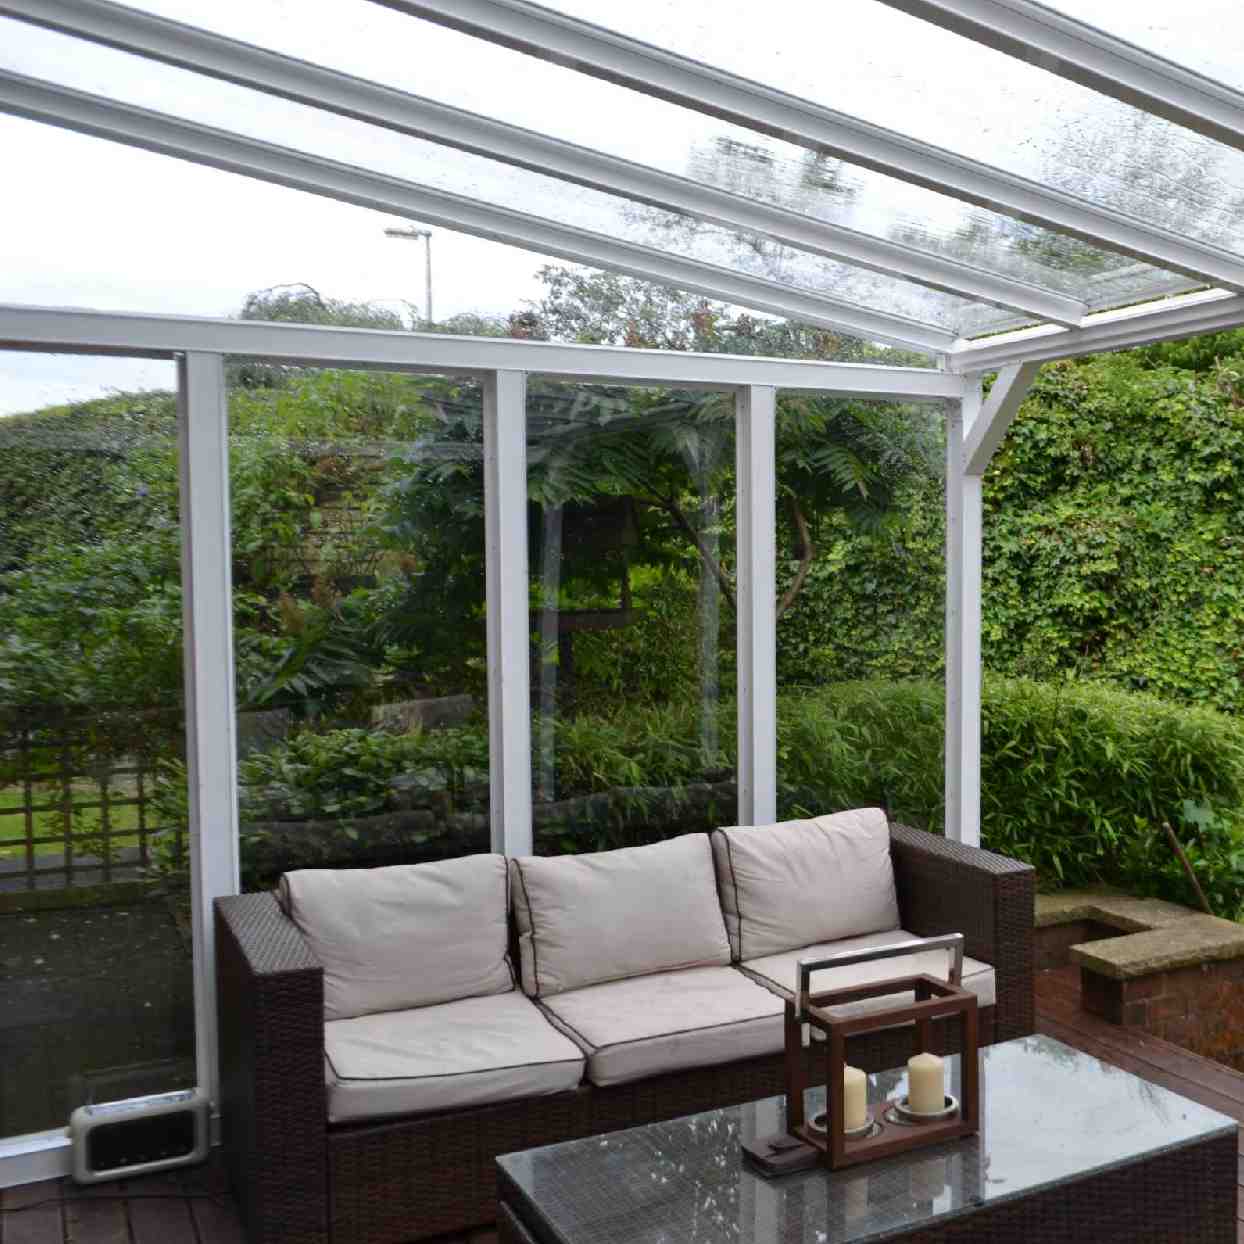 Buy Omega Verandah White with 6mm Glass Clear Plate Polycarbonate Glazing - 4.2m (W) x 3.5m (P), (3) Supporting Posts online today